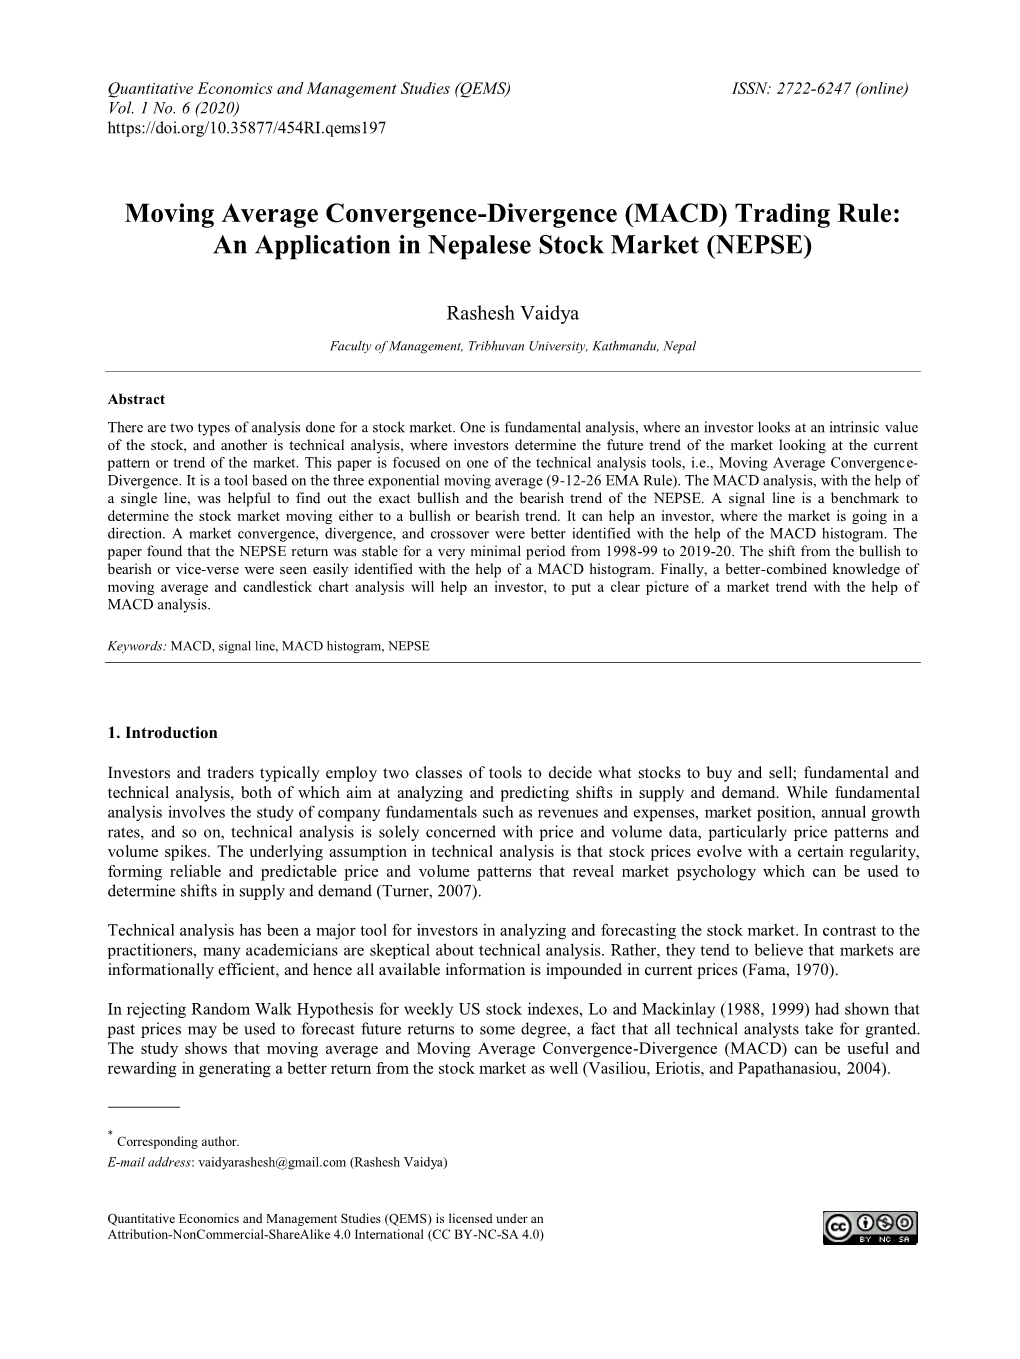 MACD) Trading Rule: an Application in Nepalese Stock Market (NEPSE